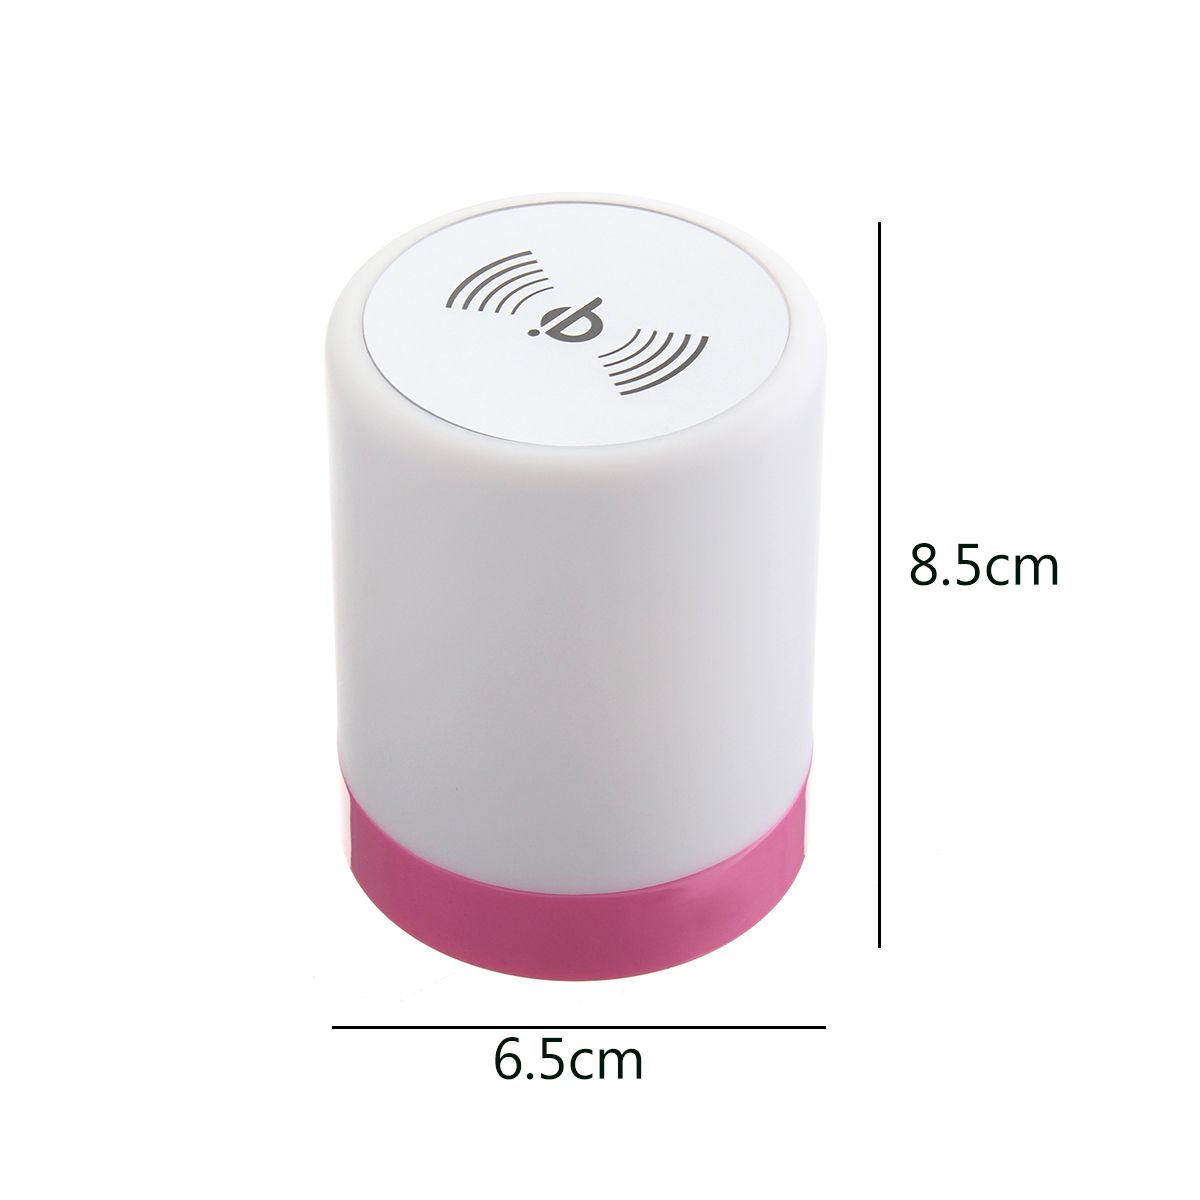 Wireless-Phone-Charger-10000mAh-Power-Bank-LED-Light-Lamp-for-iPhone-X-for-Samsung-1260000